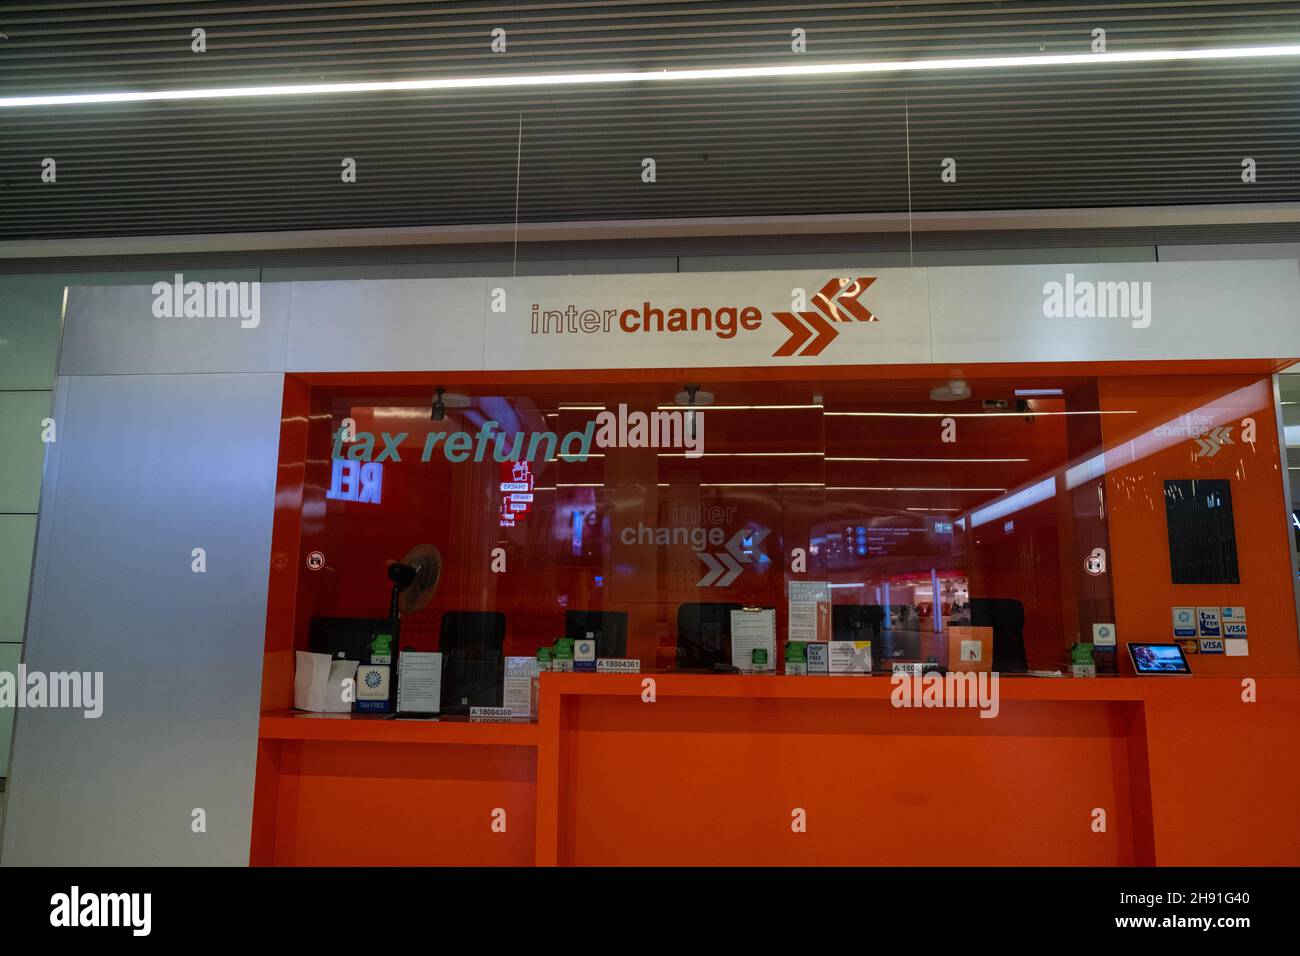 Budapest, Hungary - 1 November 2021: interchange currency exchange in airport, Illustrative Editorial. Stock Photo